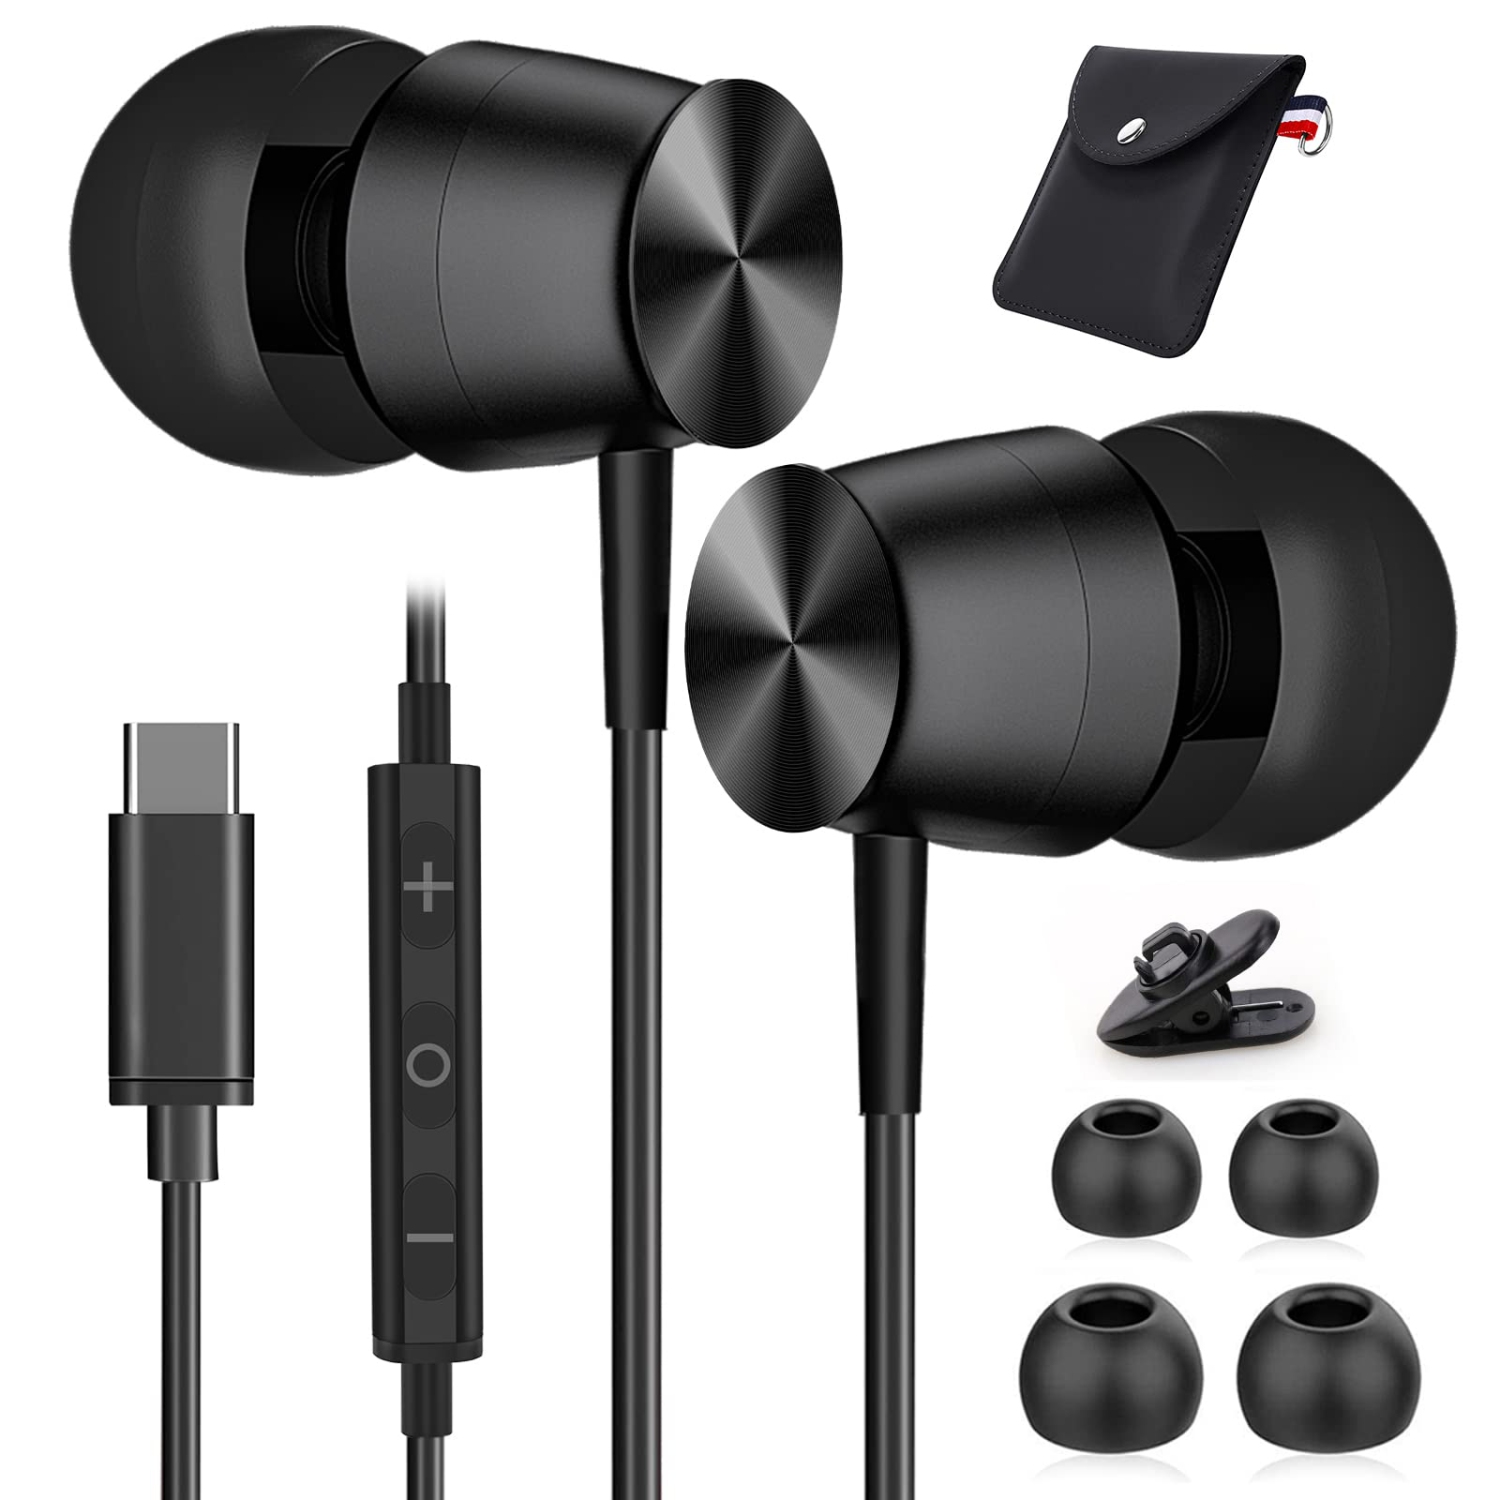 USB C Headphones with Mic for Samsung S21 FE S20 Ultra, AILZPXX HiFi Stereo In-Ear Type C Wired Earbuds USB-C Earphones Nois